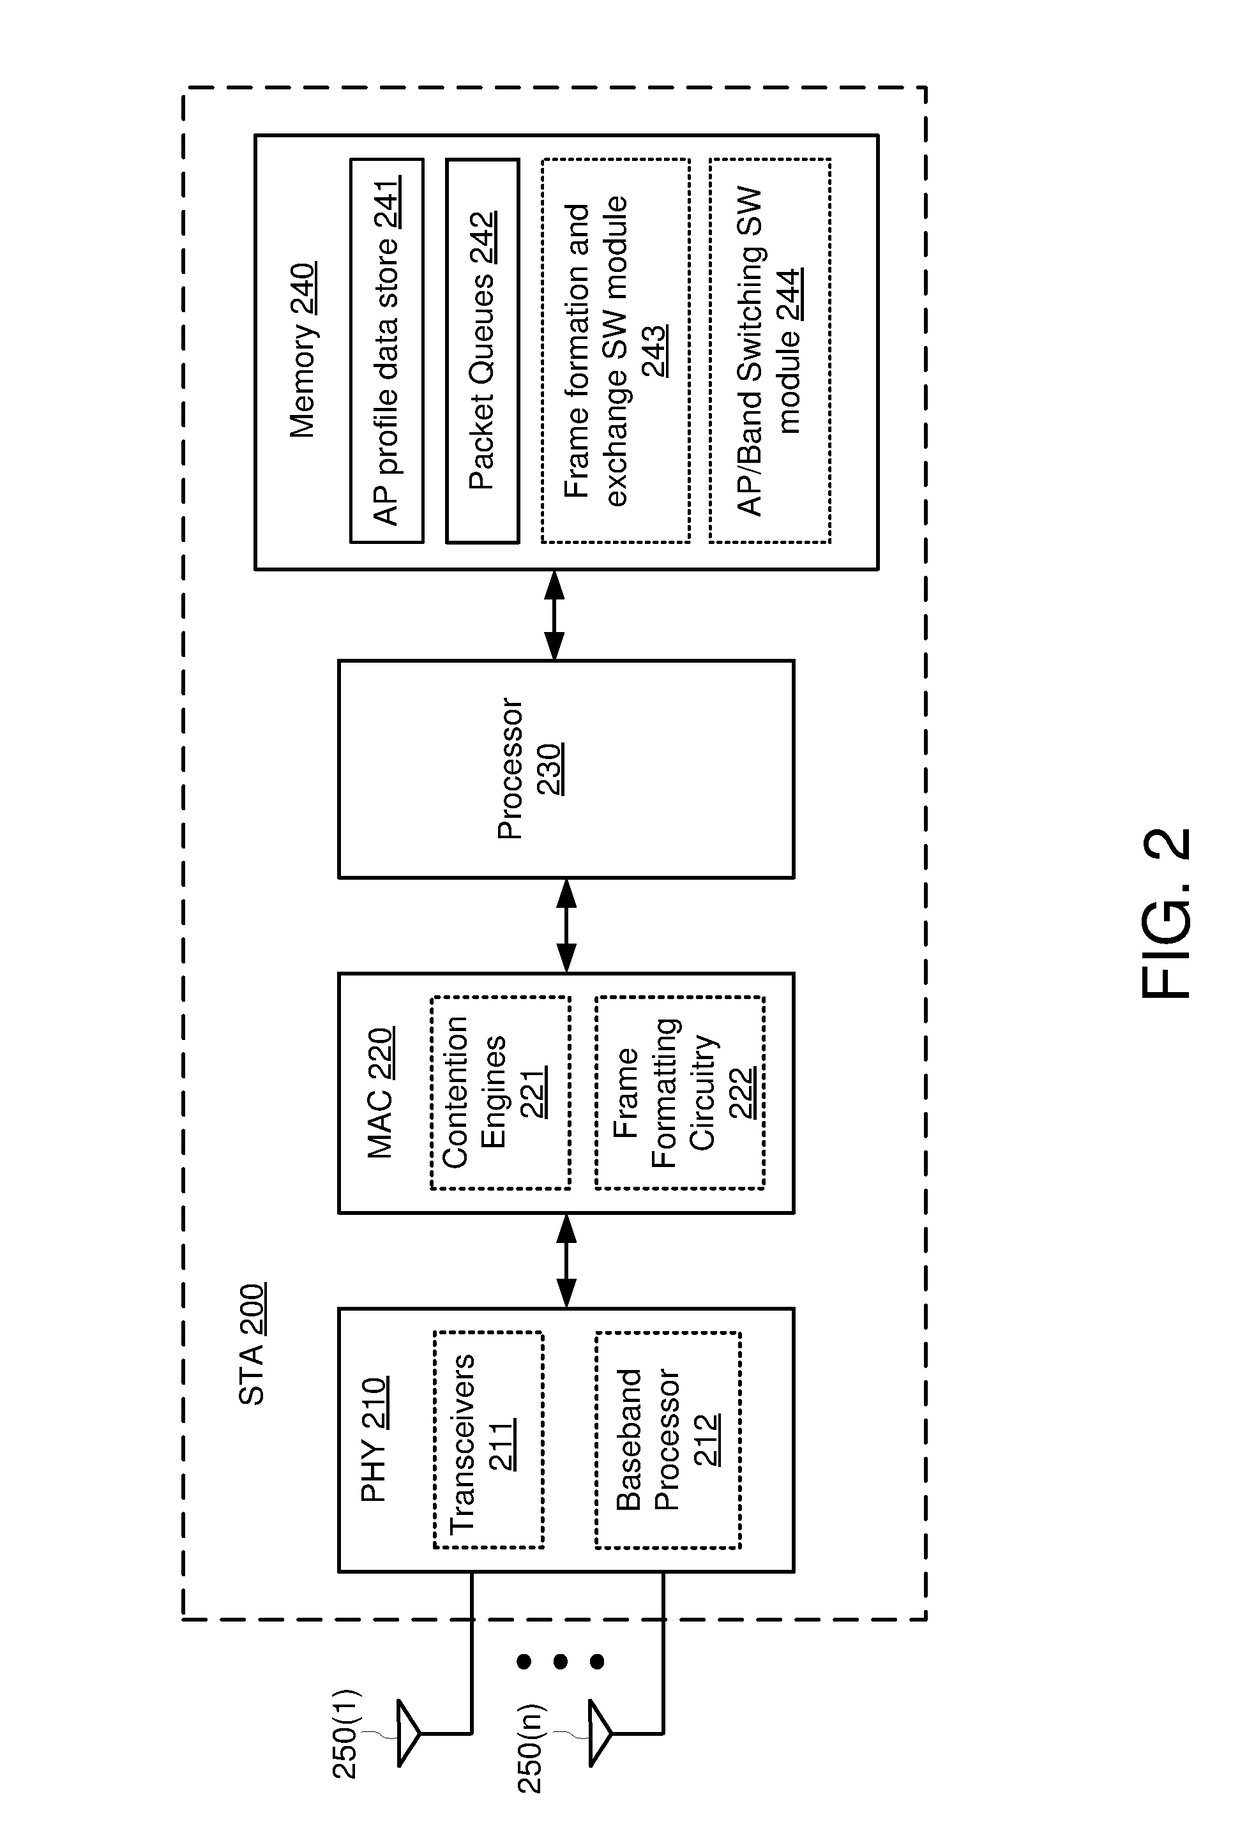 Quality of service aware access point and device steering